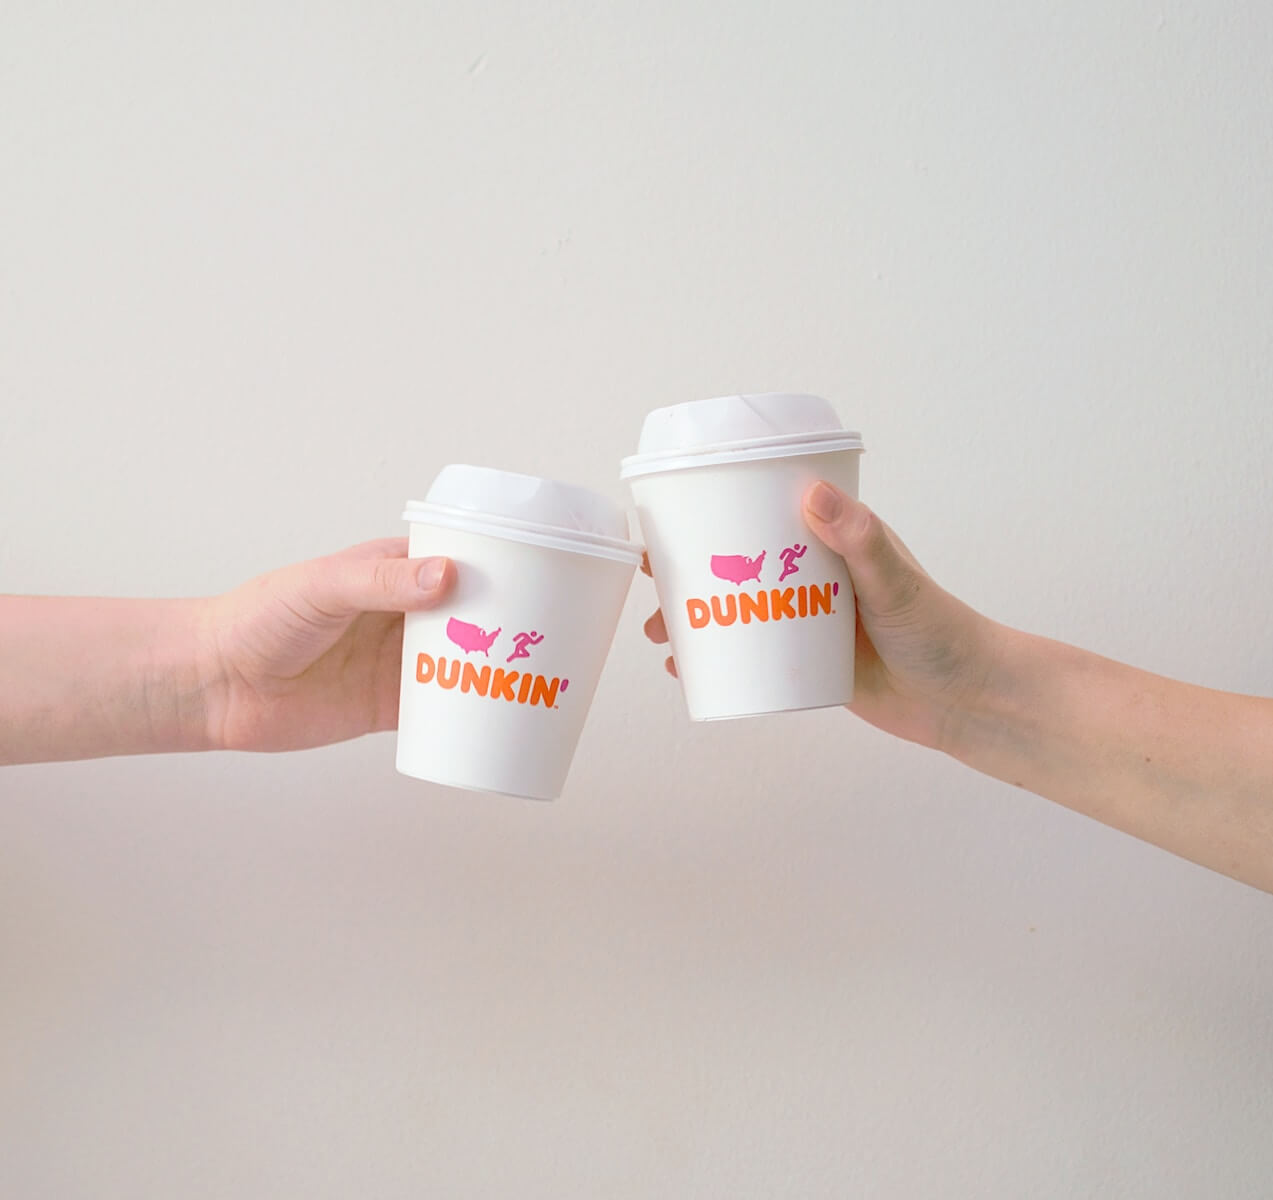 Two people cheersing their Dunkin' drinks